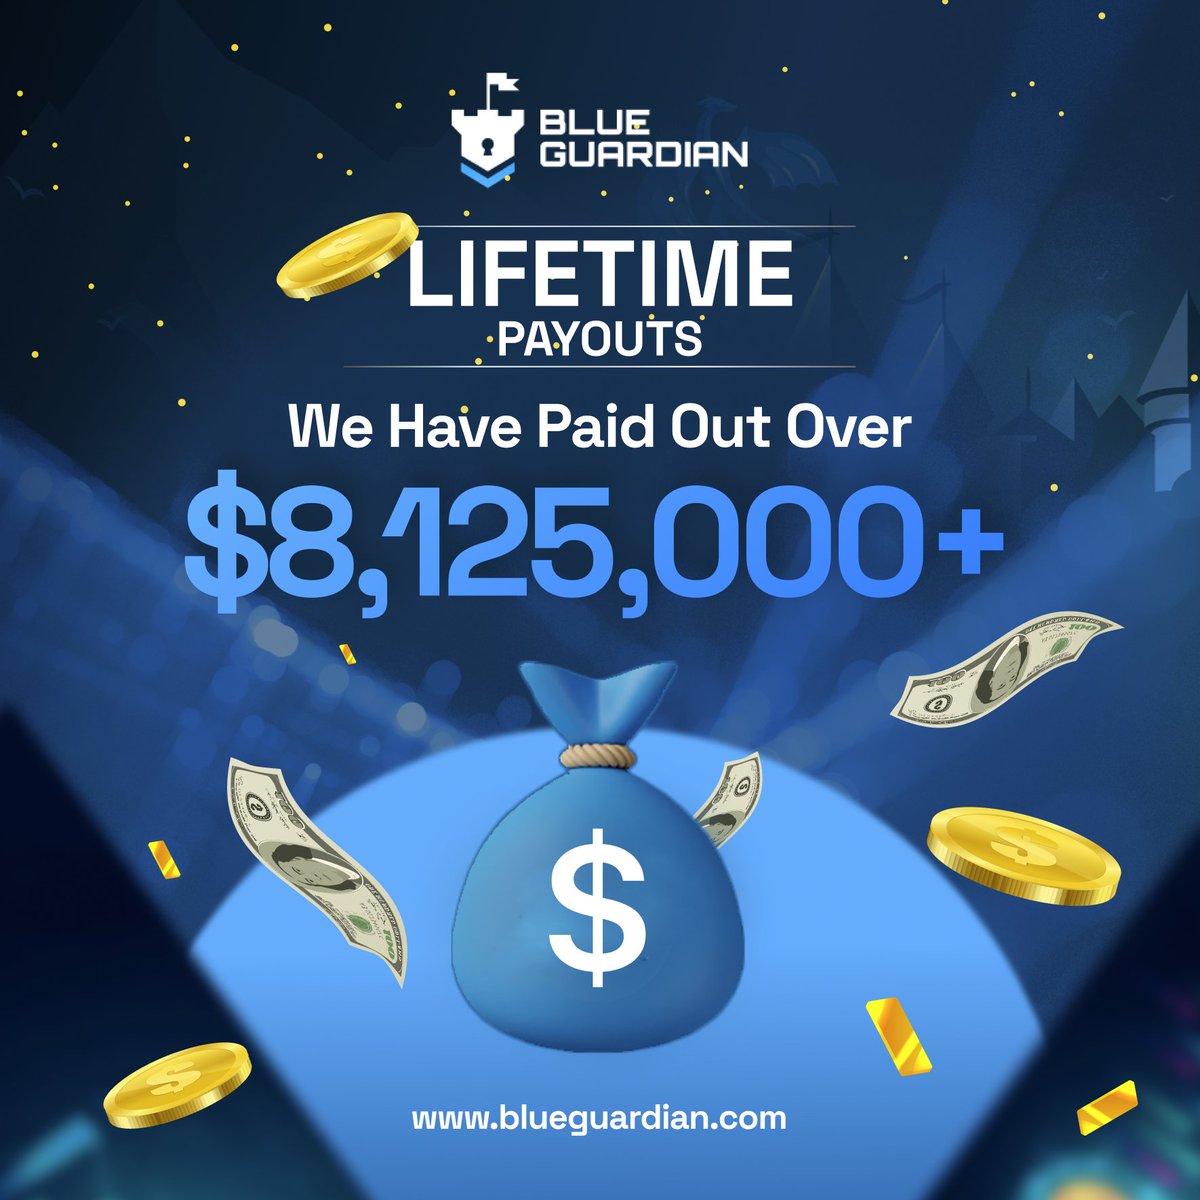 We have paid out over $8,125,000.00+ in lifetime payouts! 🔥 We're one of the few firms with a strong track record of no declined payouts, our reserves are healthy, and we have an excellent plan for the next Quarter. On our way to becoming a Top 10 Firm Soon 🚀